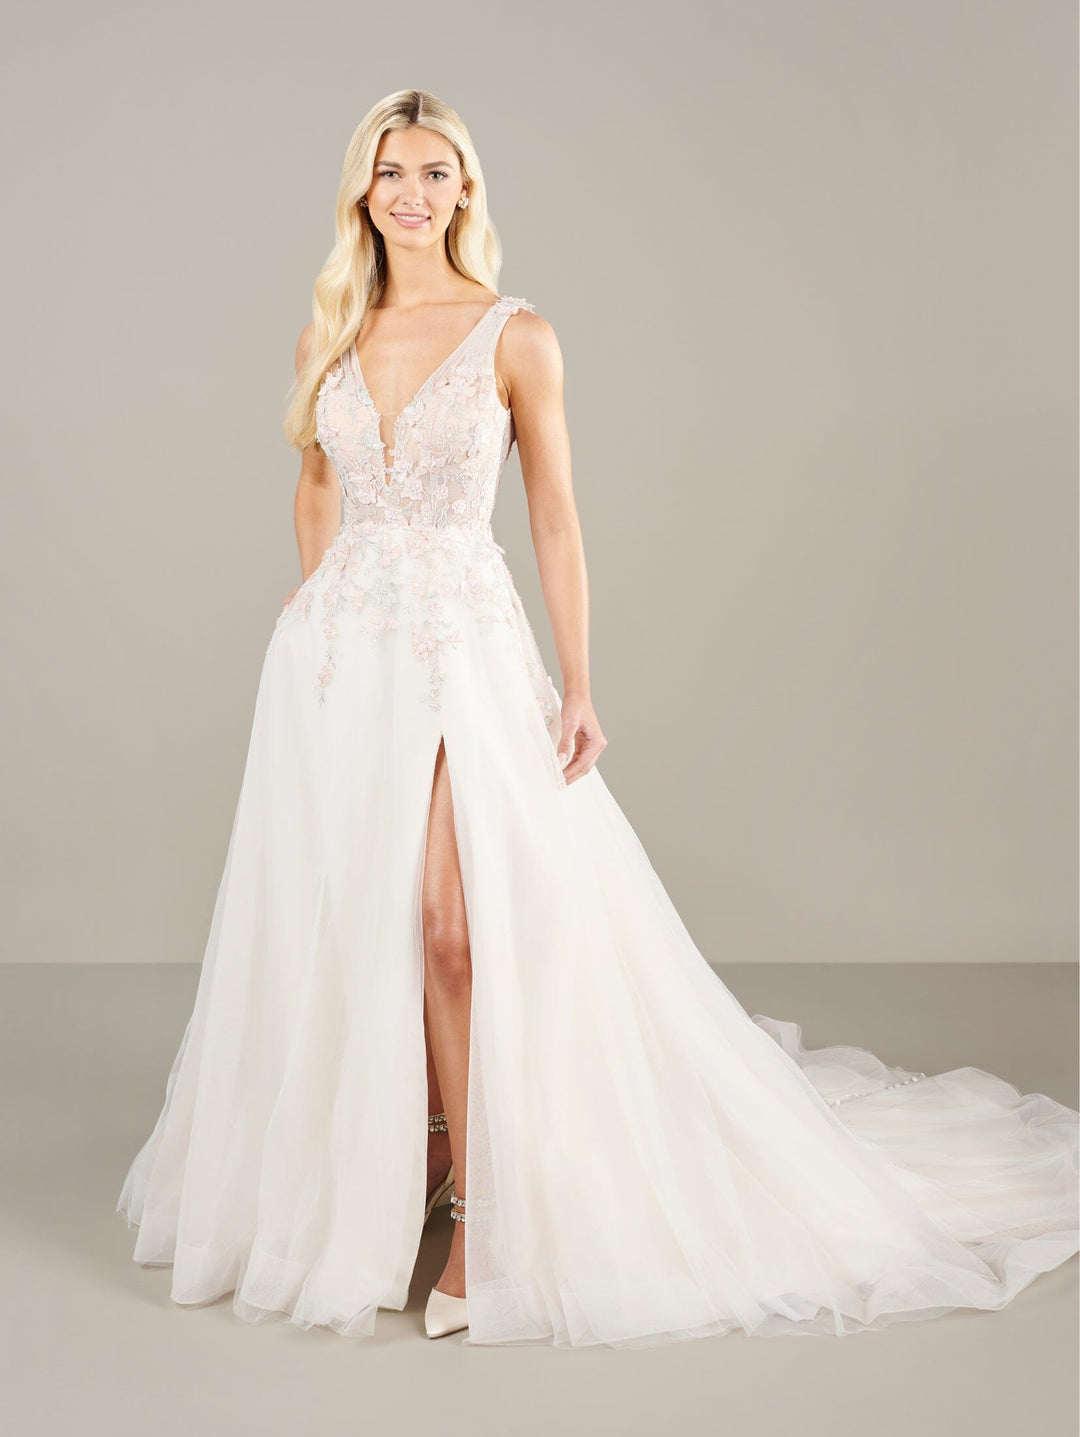 Pink Applique Sleeveless Bridal Gown by Adrianna Papell 31275